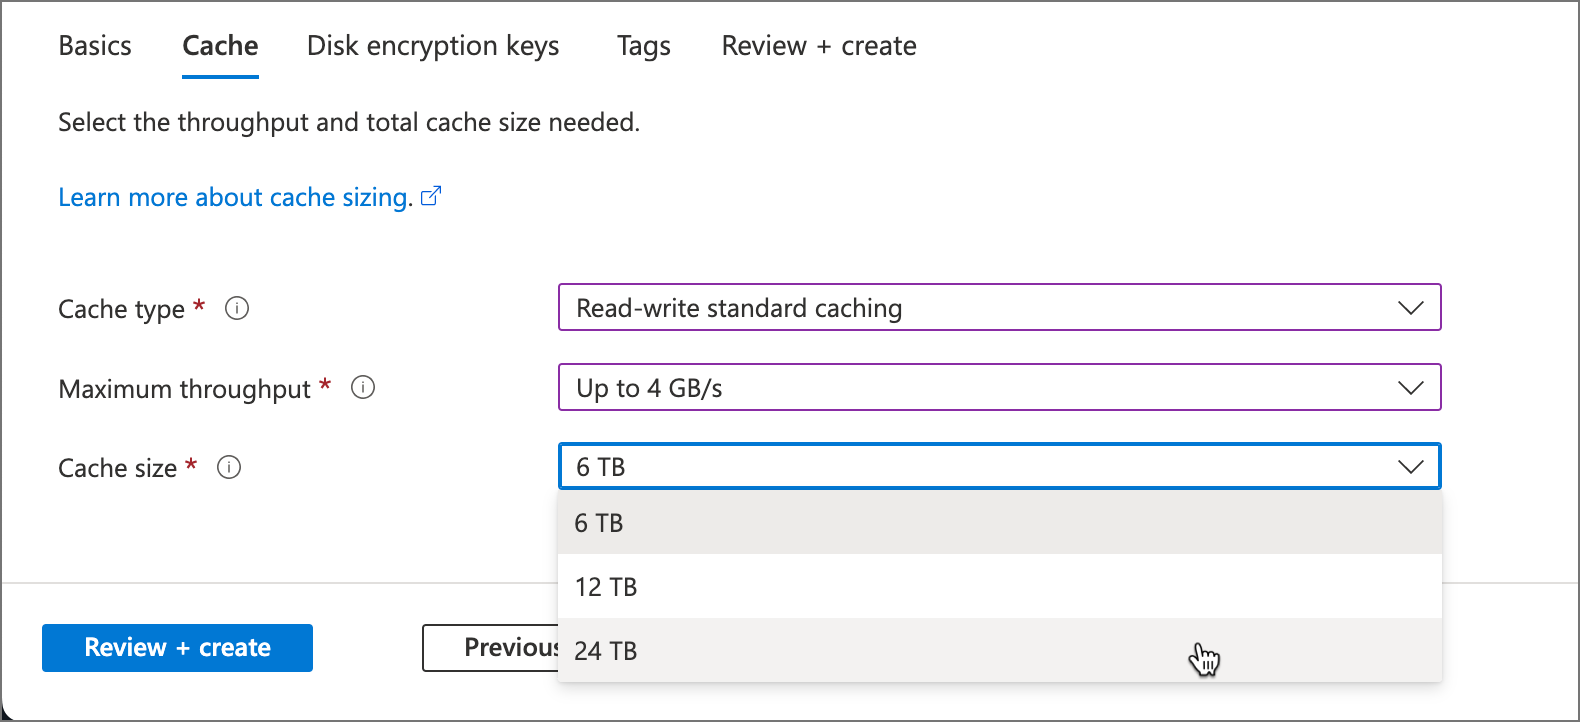 Screenshot of the Cache tab in the HPC Cache creation workflow. The Cache type field is filled with Read-write standard caching, and the Maximum throughput field is filled with Up to 4 GB/s. The Cache size menu is expanded and shows several selectable size options: 6 TB, 12 TB, and 24 TB.